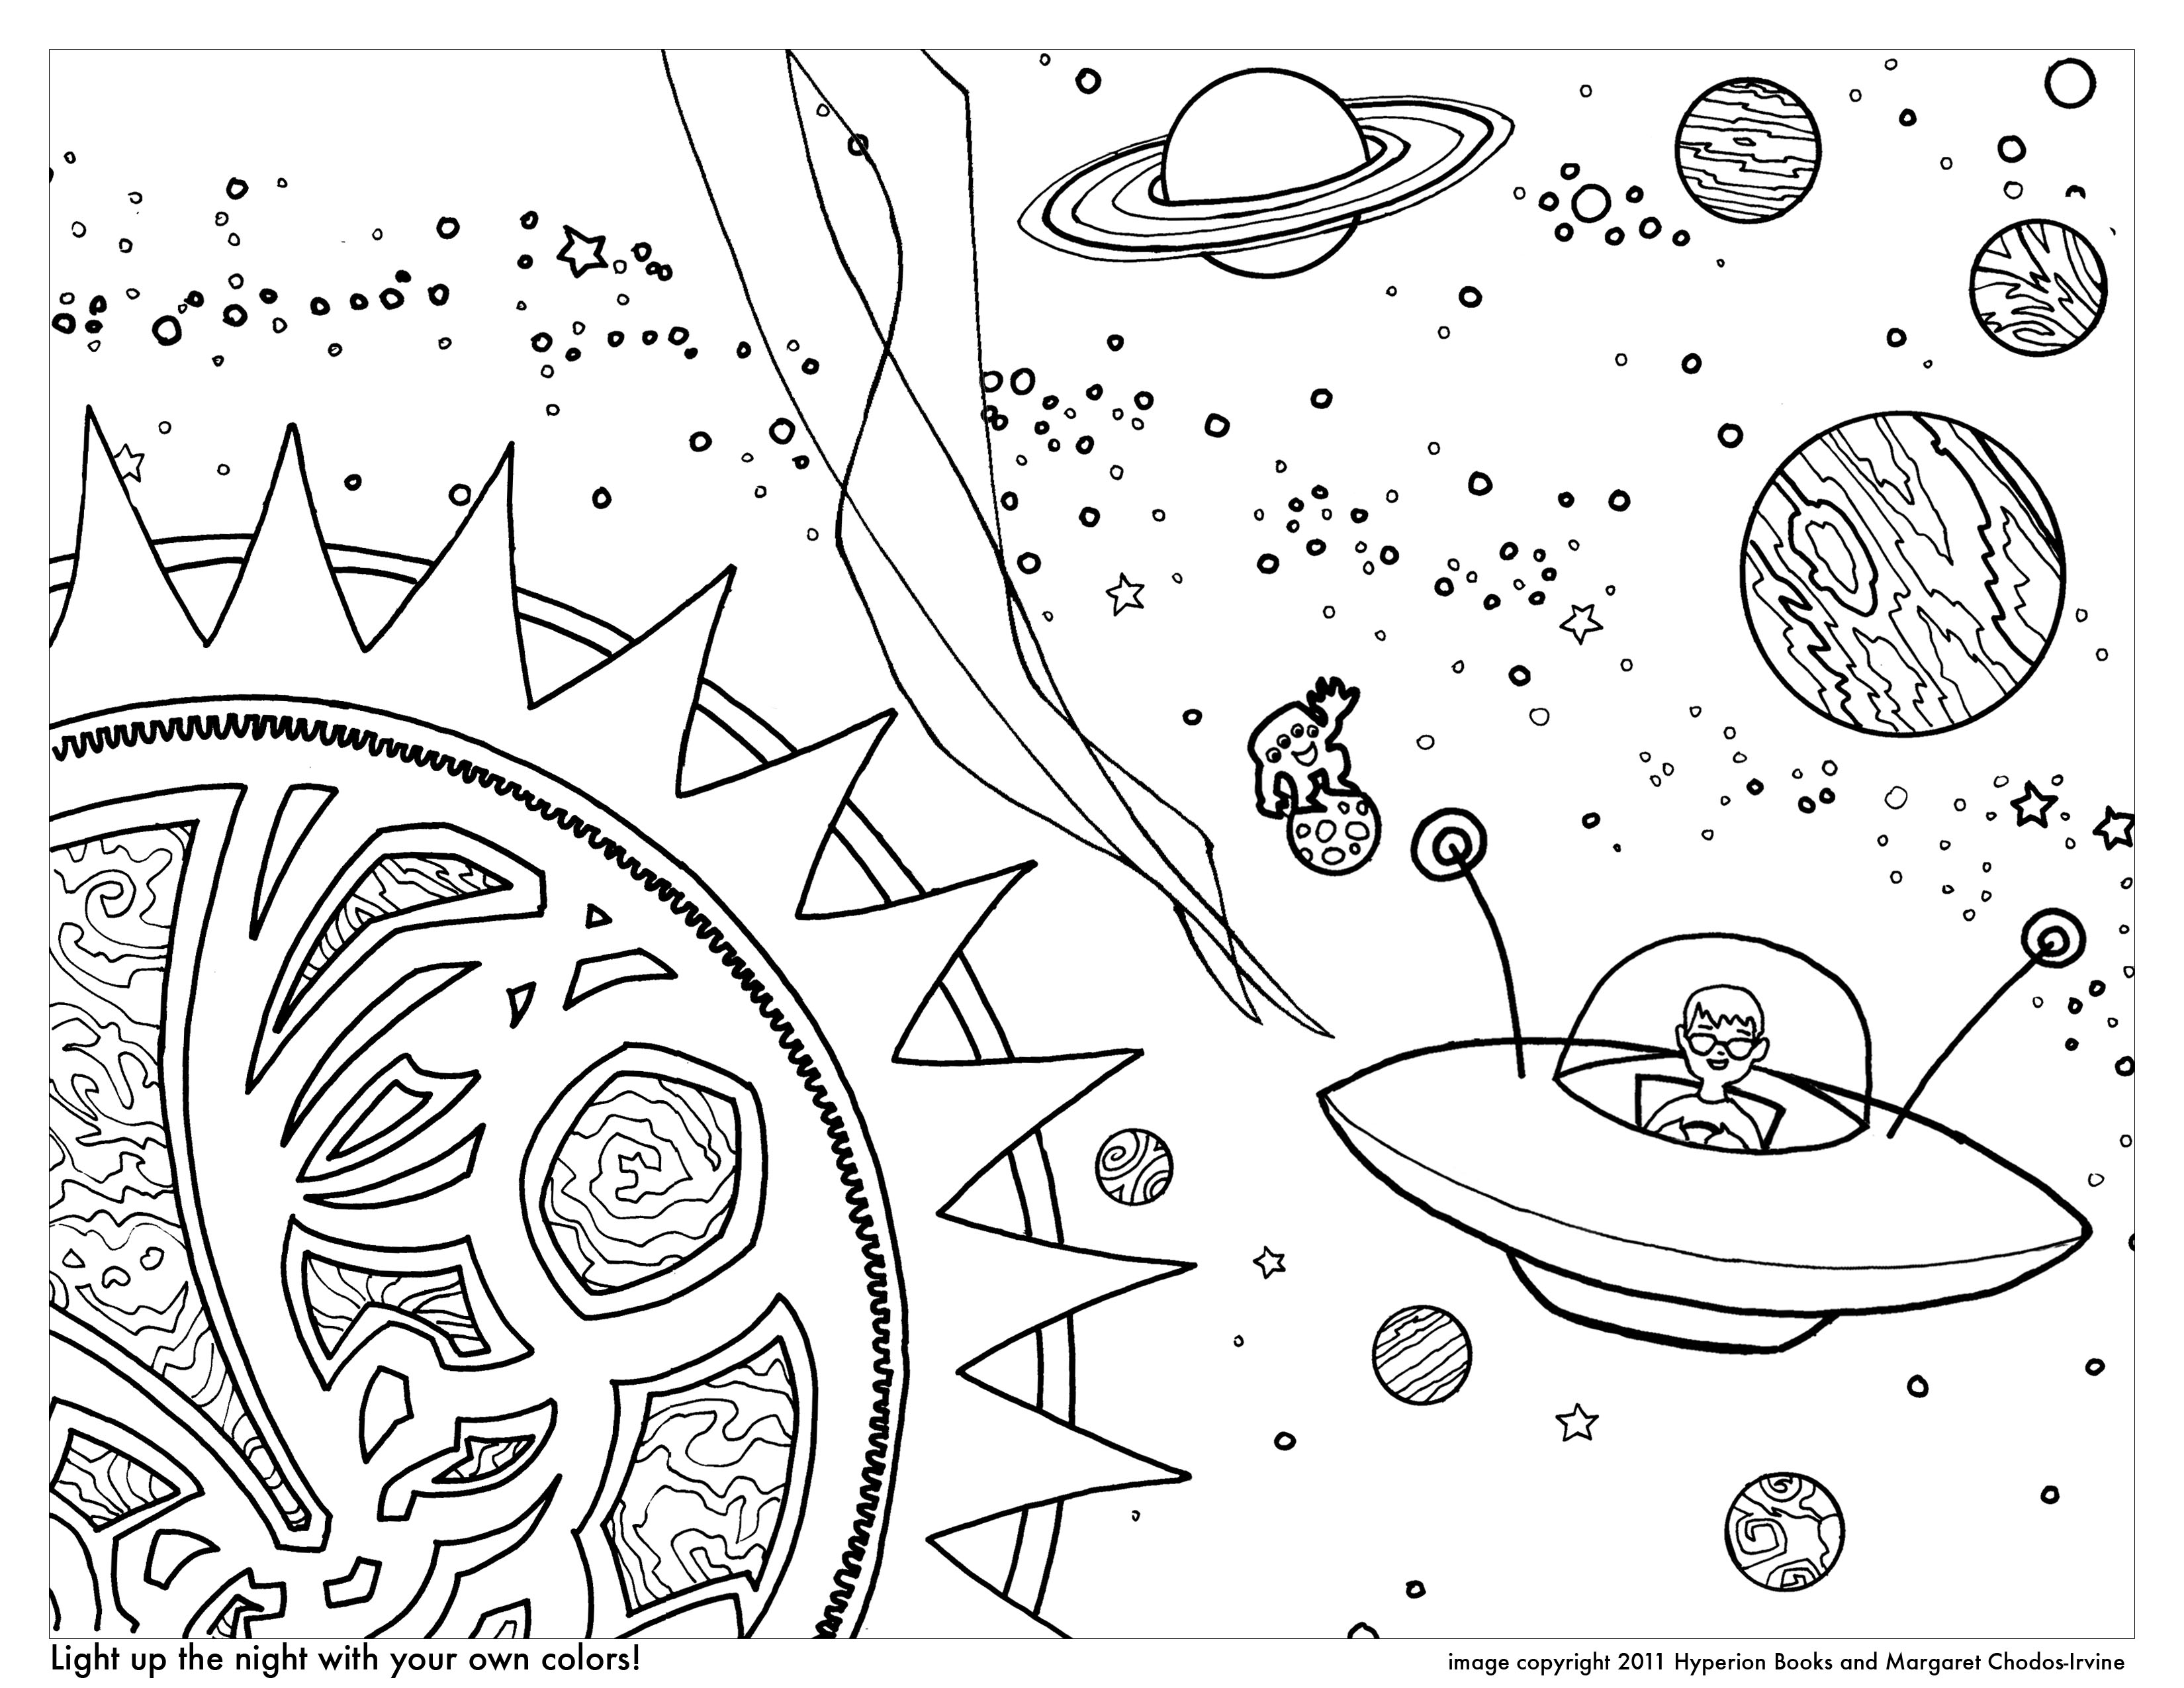 15 Best Images of Science Stars Worksheets - Drawing Constellations